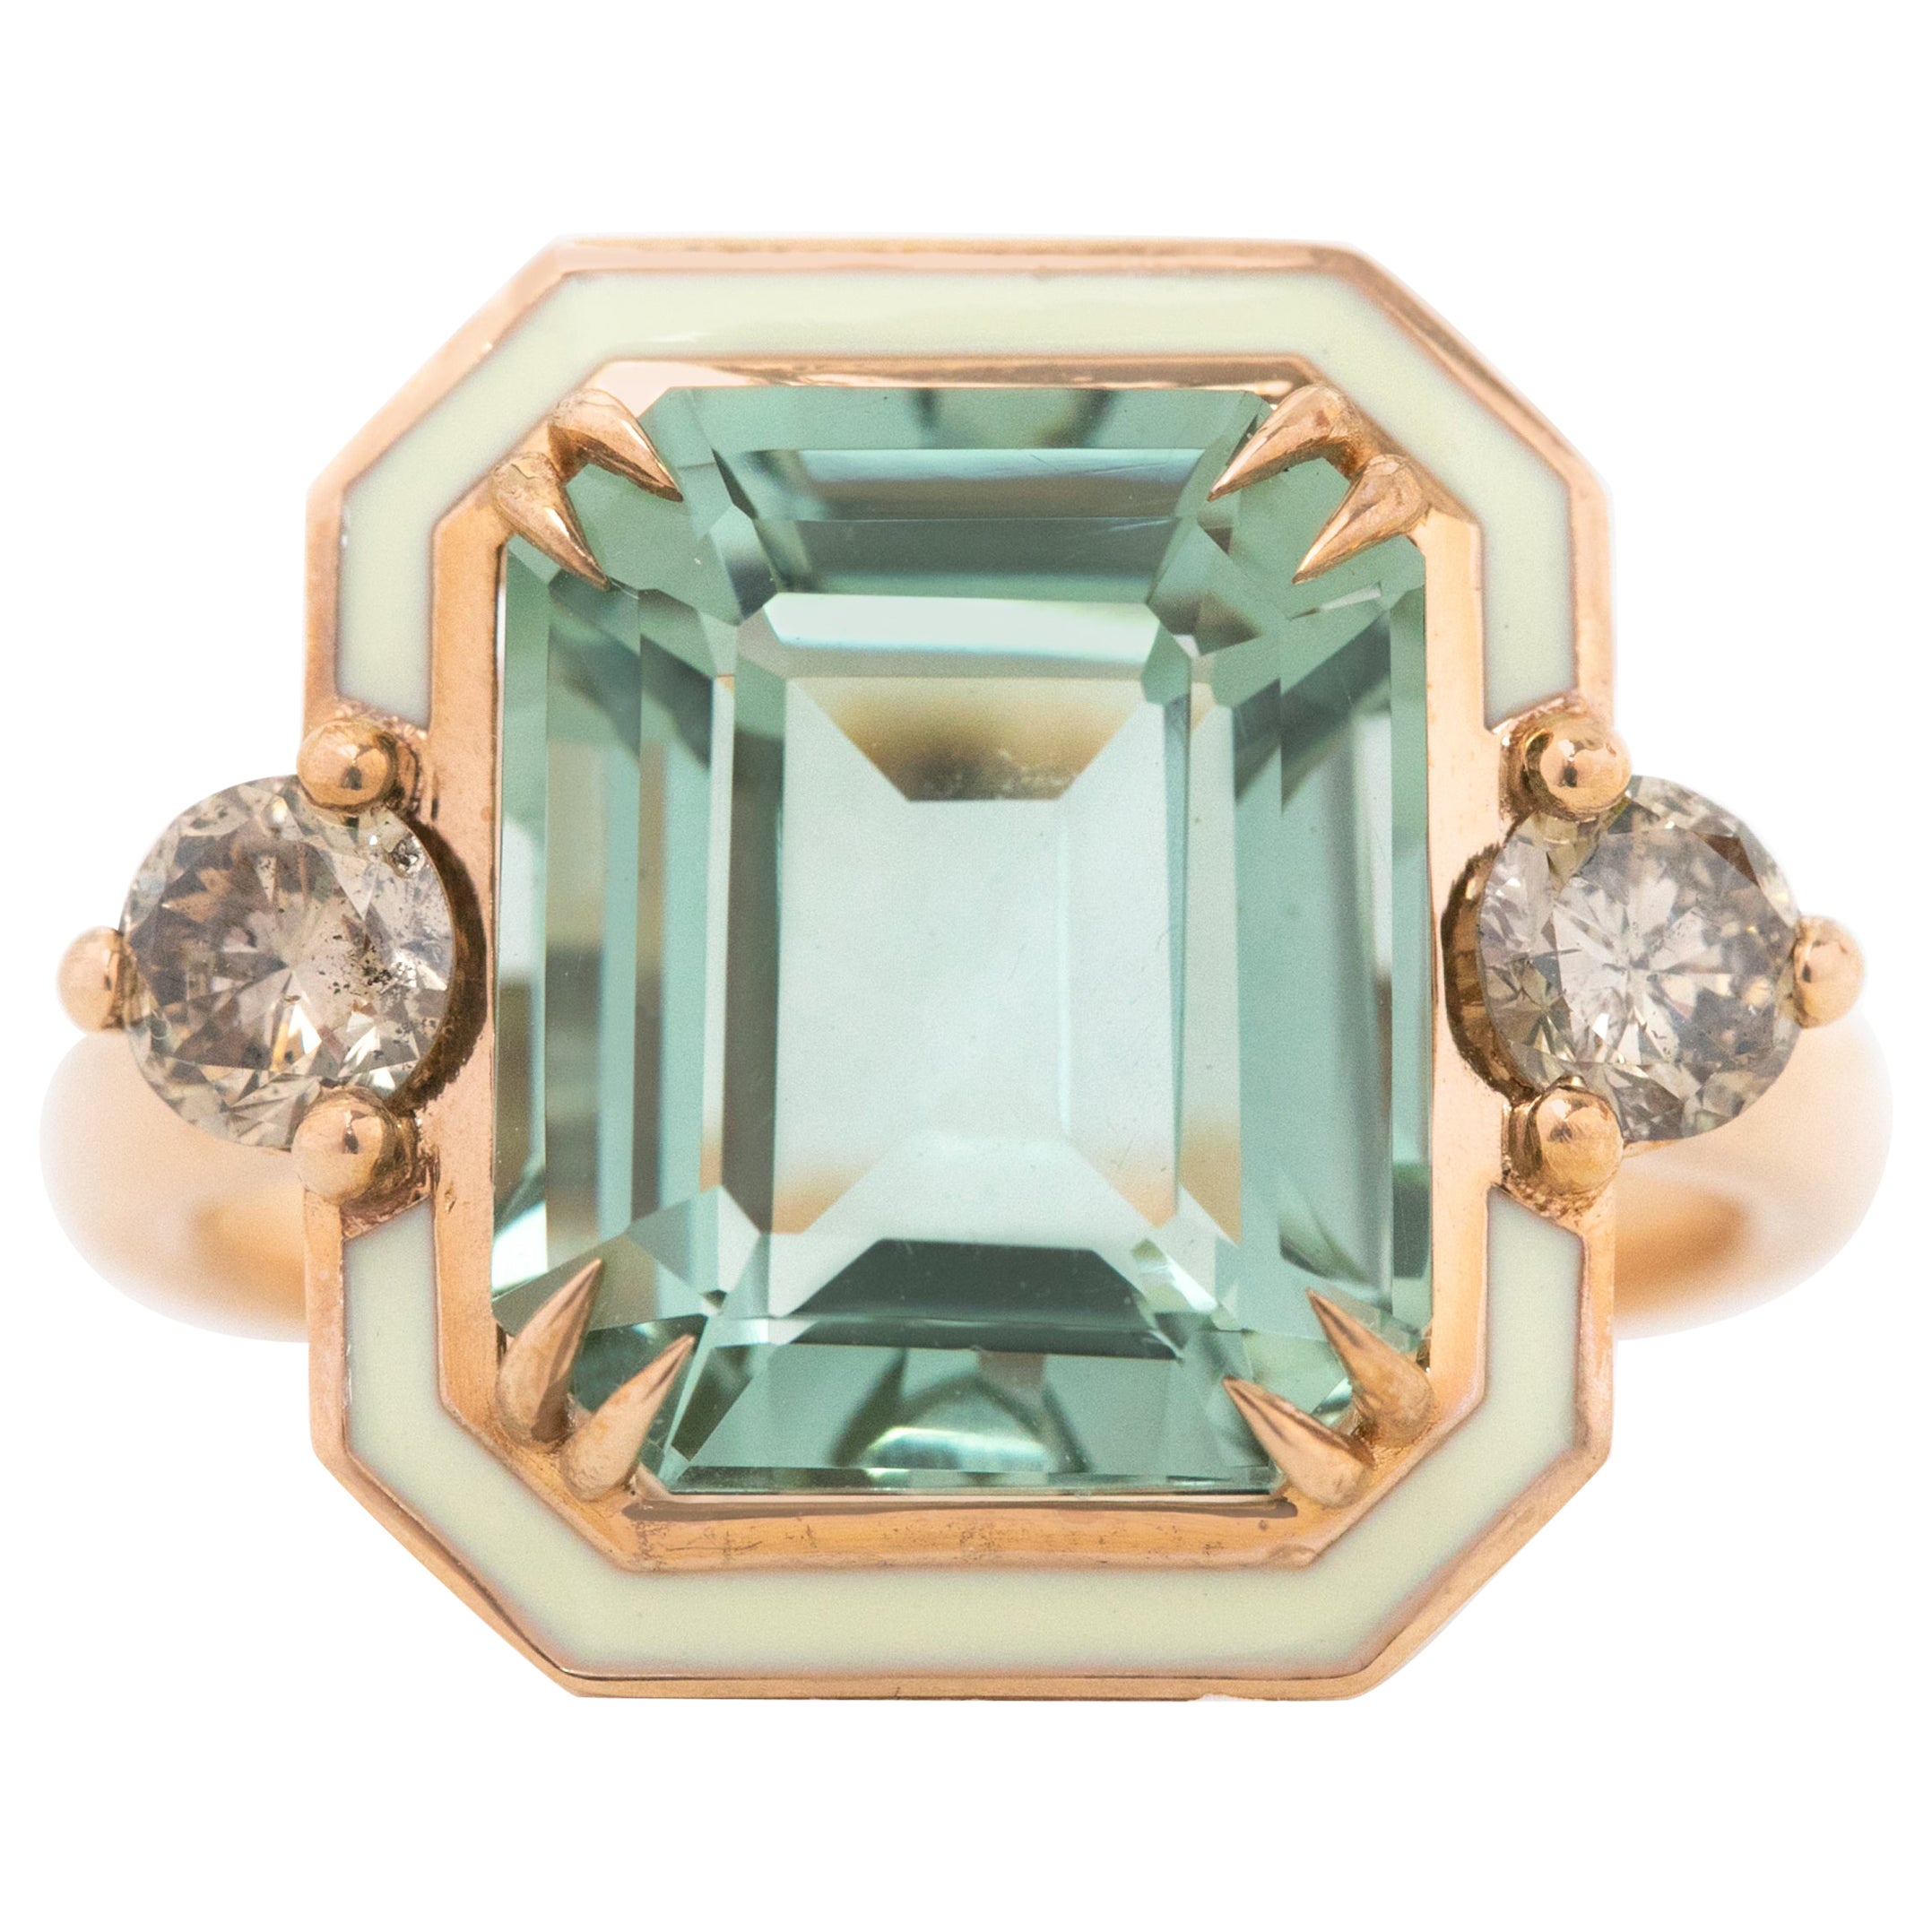 For Sale:  14k Gold Art Deco Ring, 5.67ct Green Amethyst Ring and 0.54 Cognac Diamond Ring